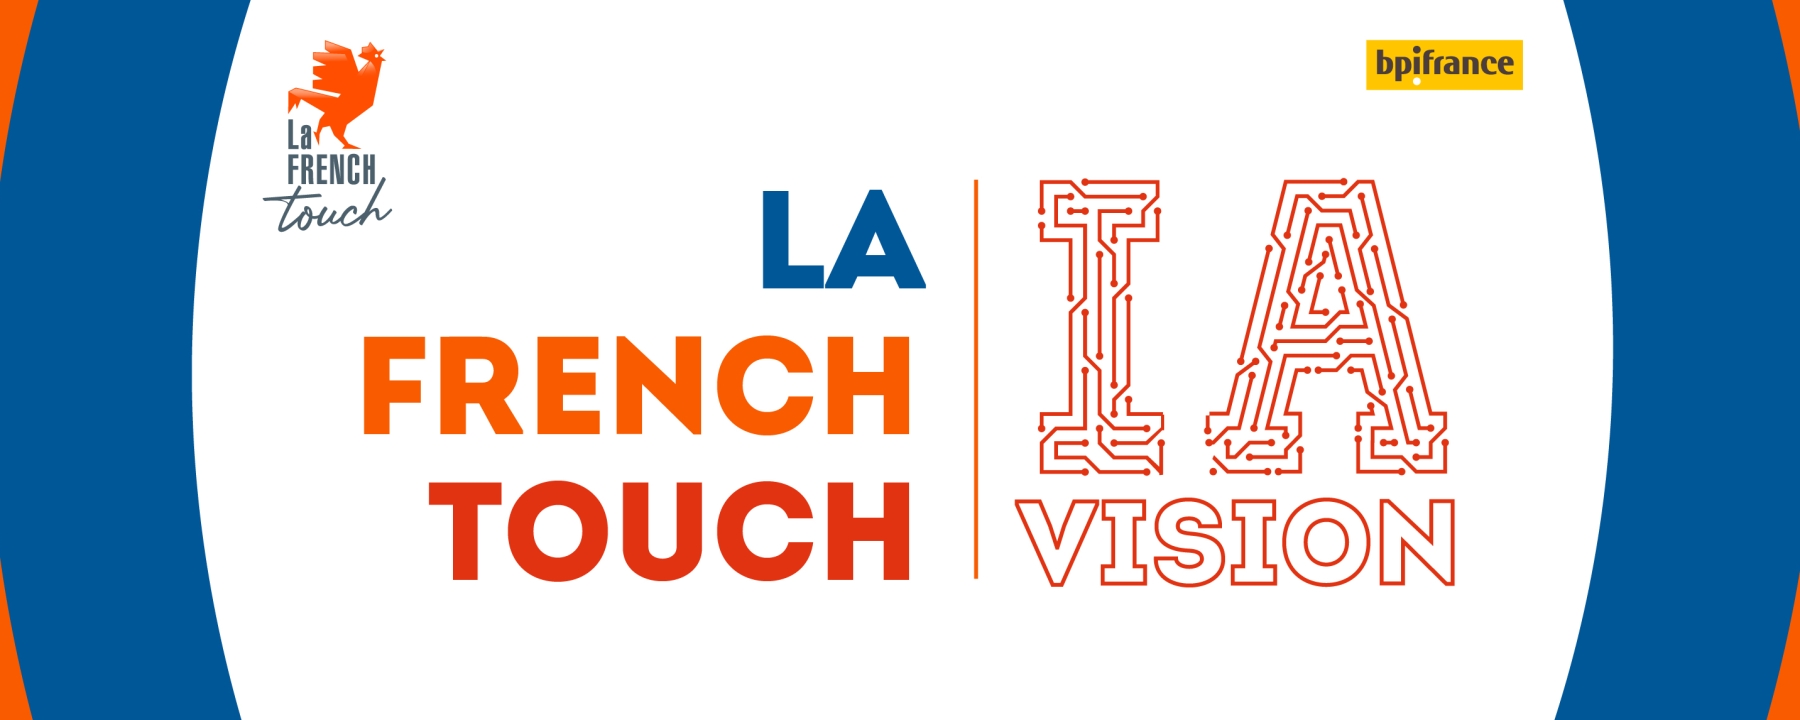 LA FRENCH TOUCH IA VISION